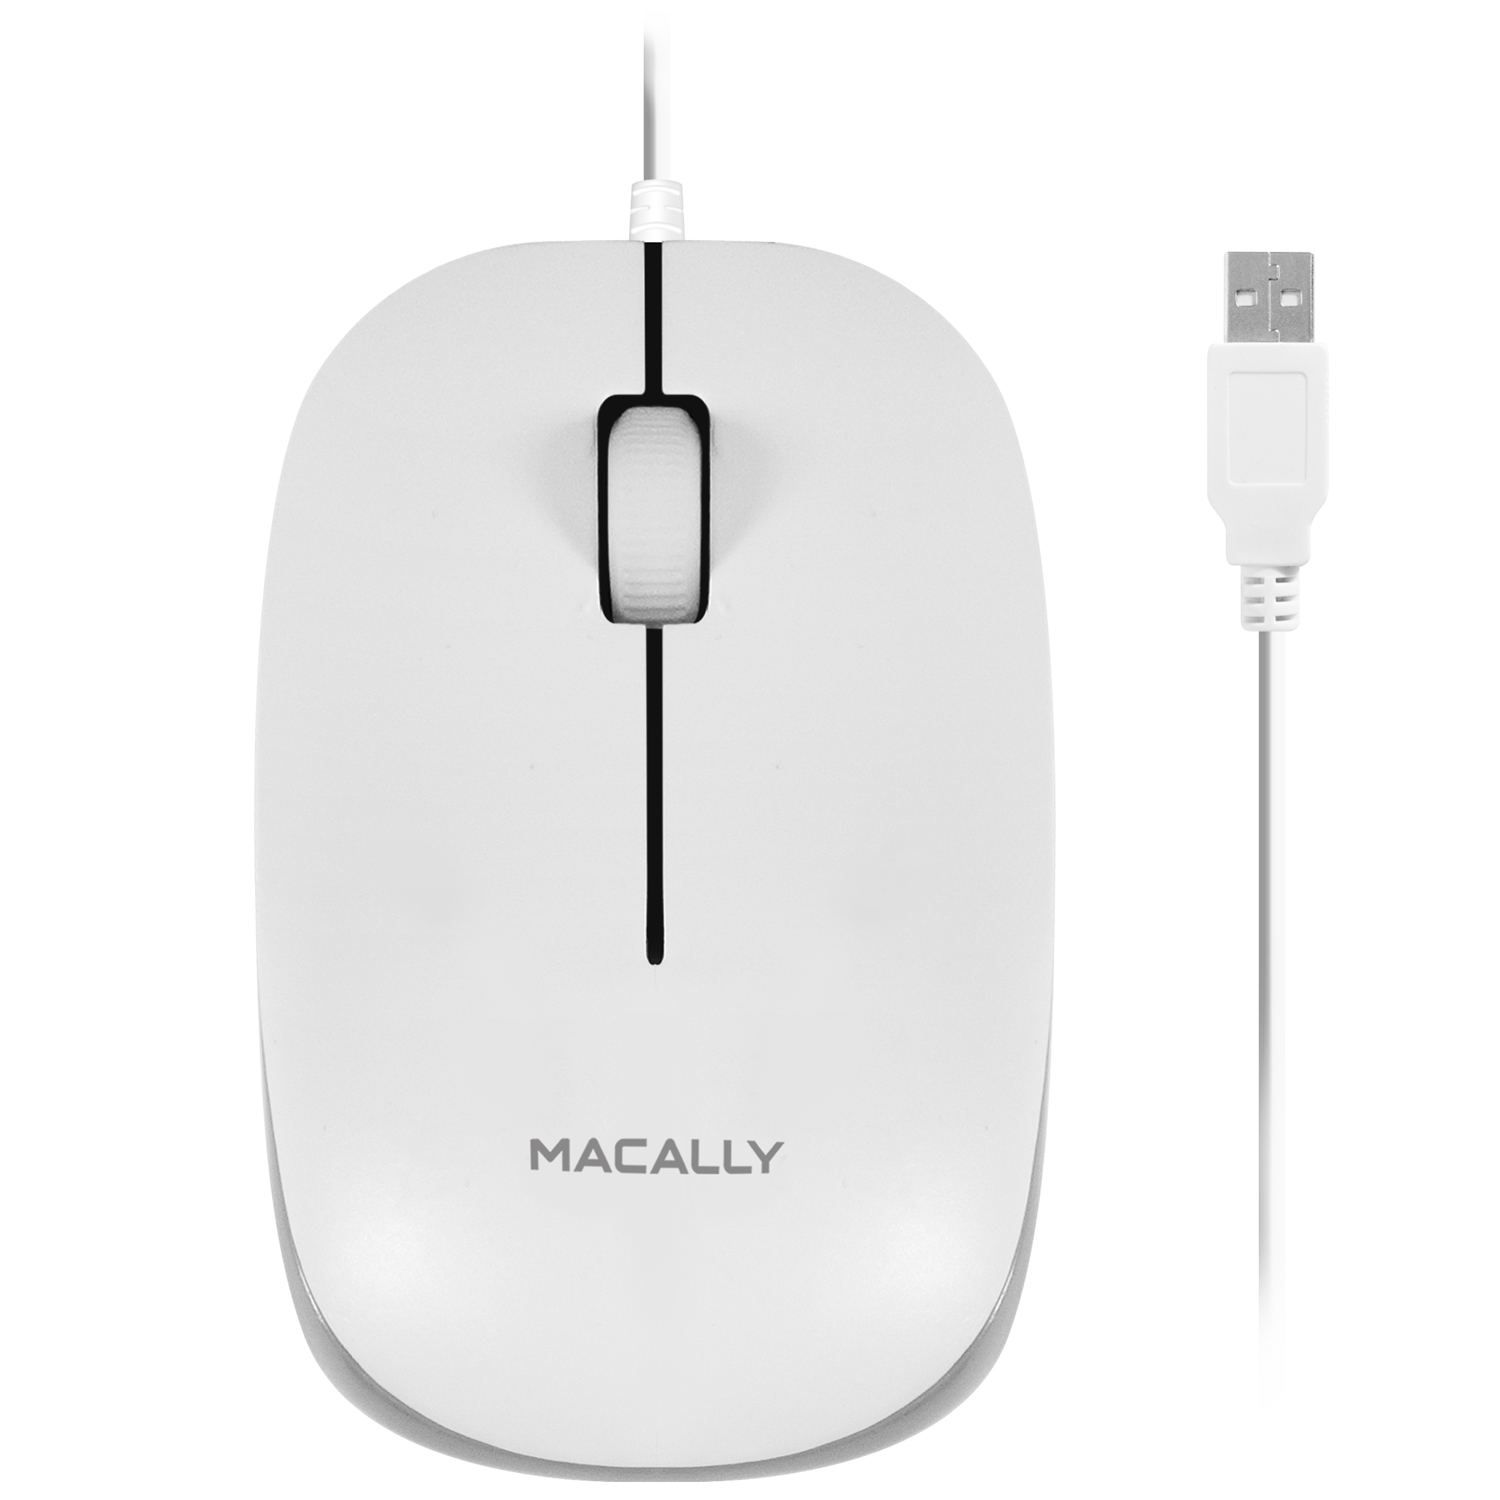 Mac Mini Laptops Apple Macbook Pro/Air 5 Foot Long Corded White Scroll Wheel Compatible with Windows PC iMac Macally USB Wired Computer Mouse with 3 Button 